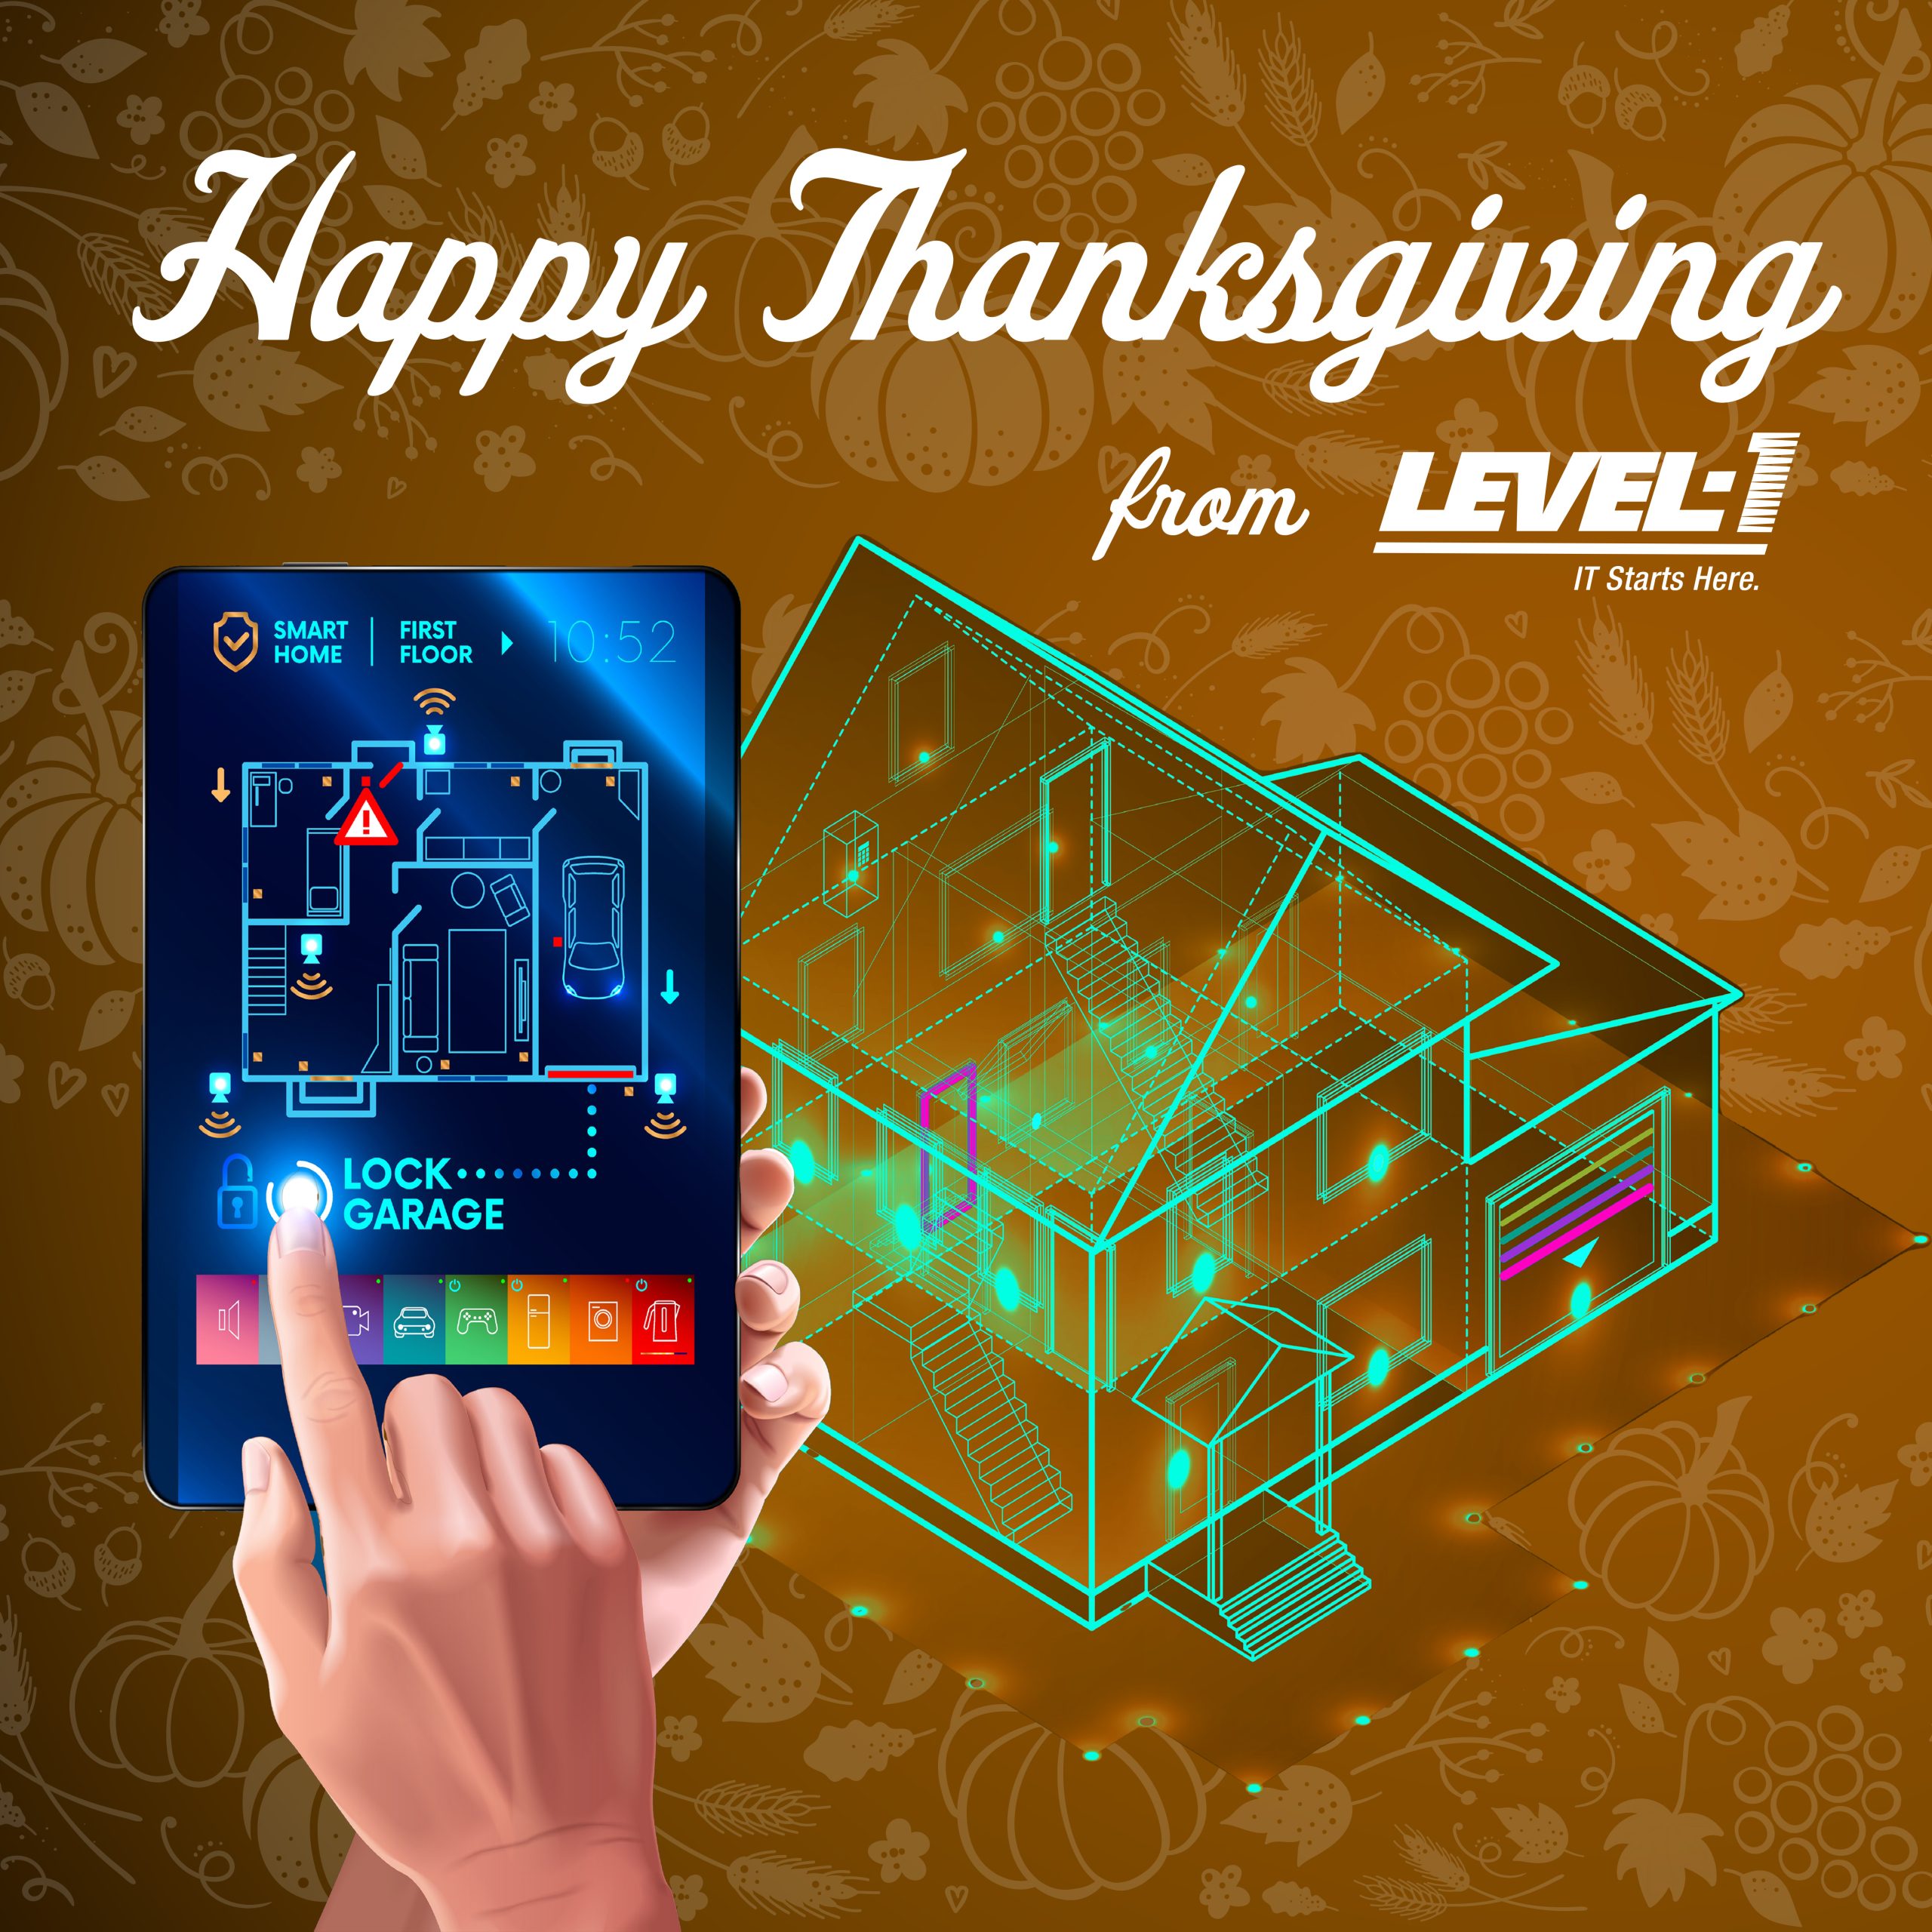 Happy Thanksgiving from Level-1!